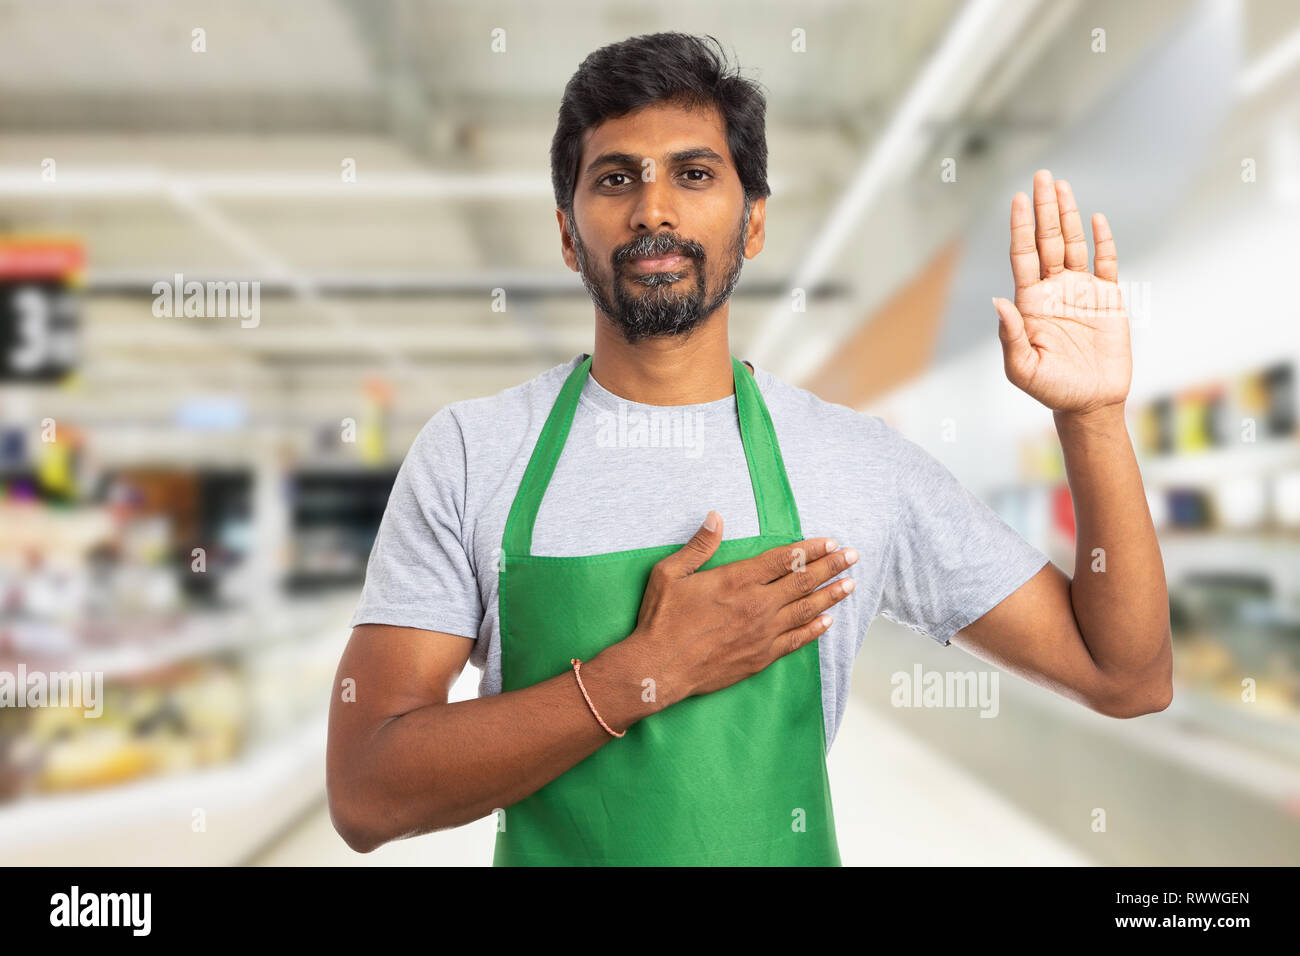 Serious trustworthy indian male hypermarket or supermarket employee making honest oath gesture with hand on heart and palm up Stock Photo